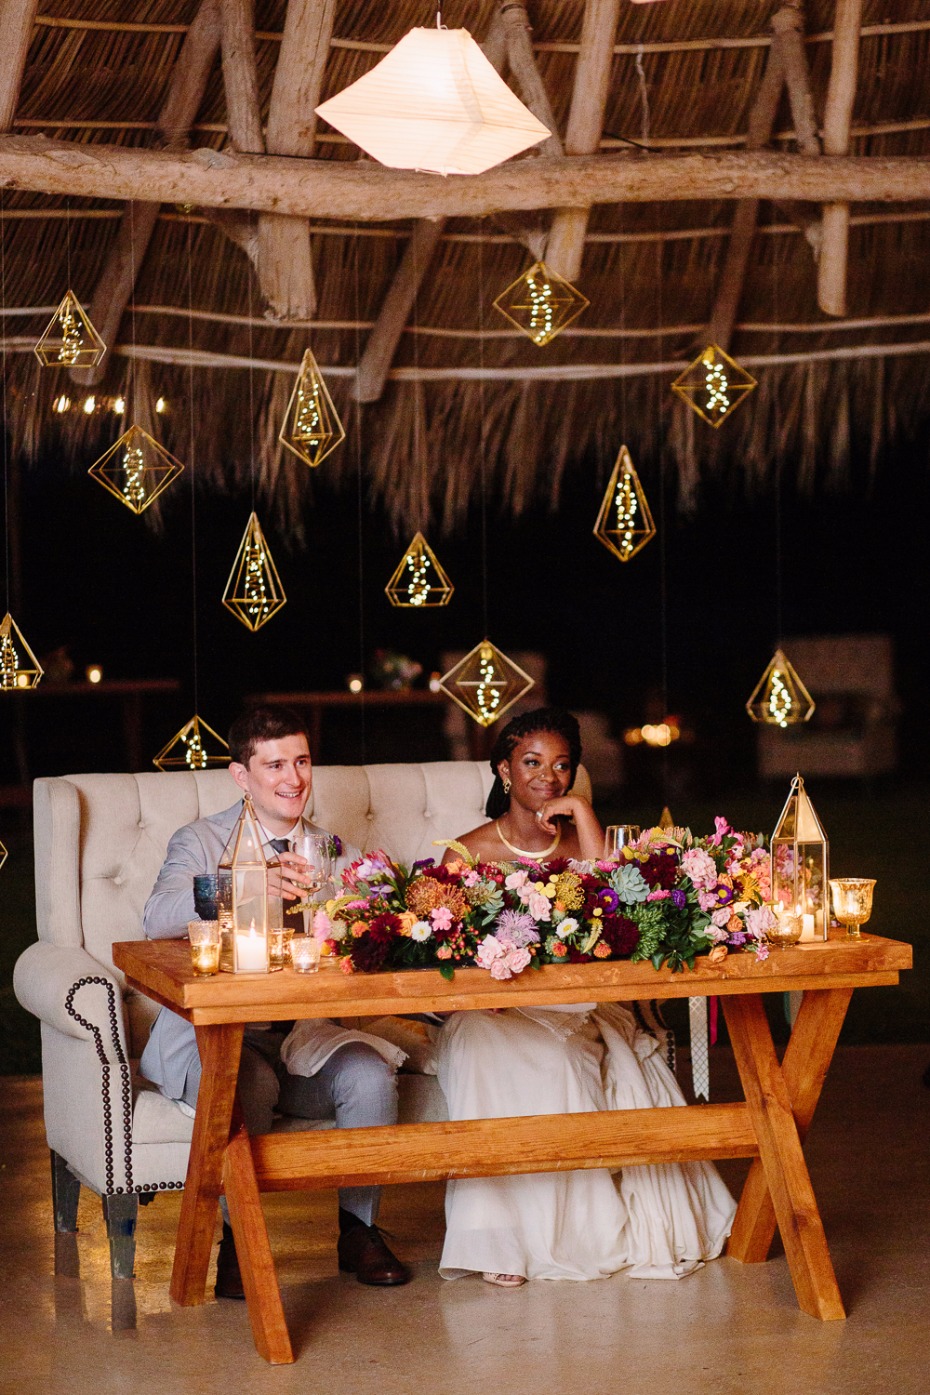 Love the hanging lights behind the sweetheart table